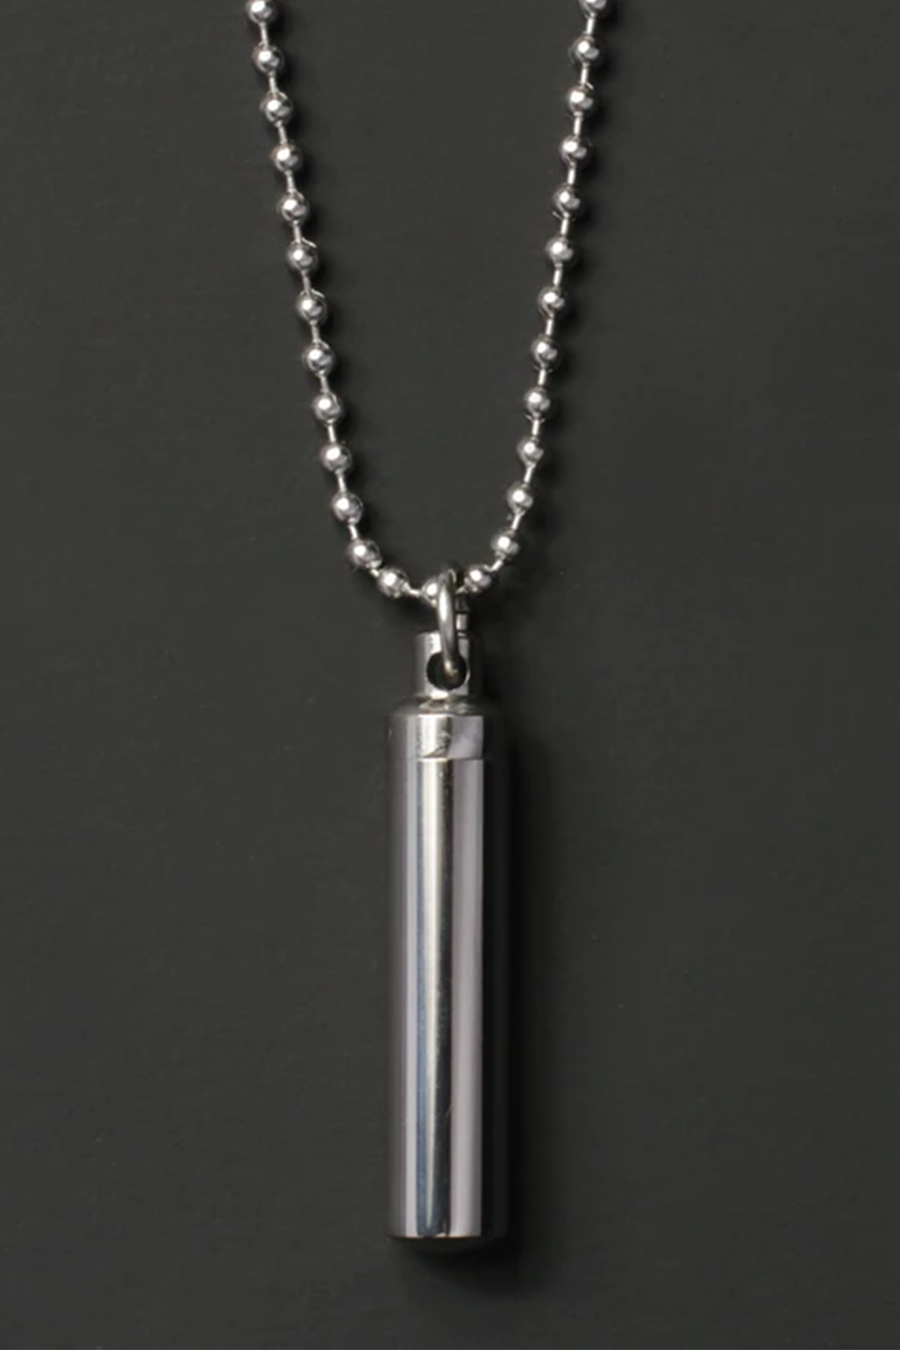 Stainless Steel Vial Necklace - Main Image Number 1 of 2